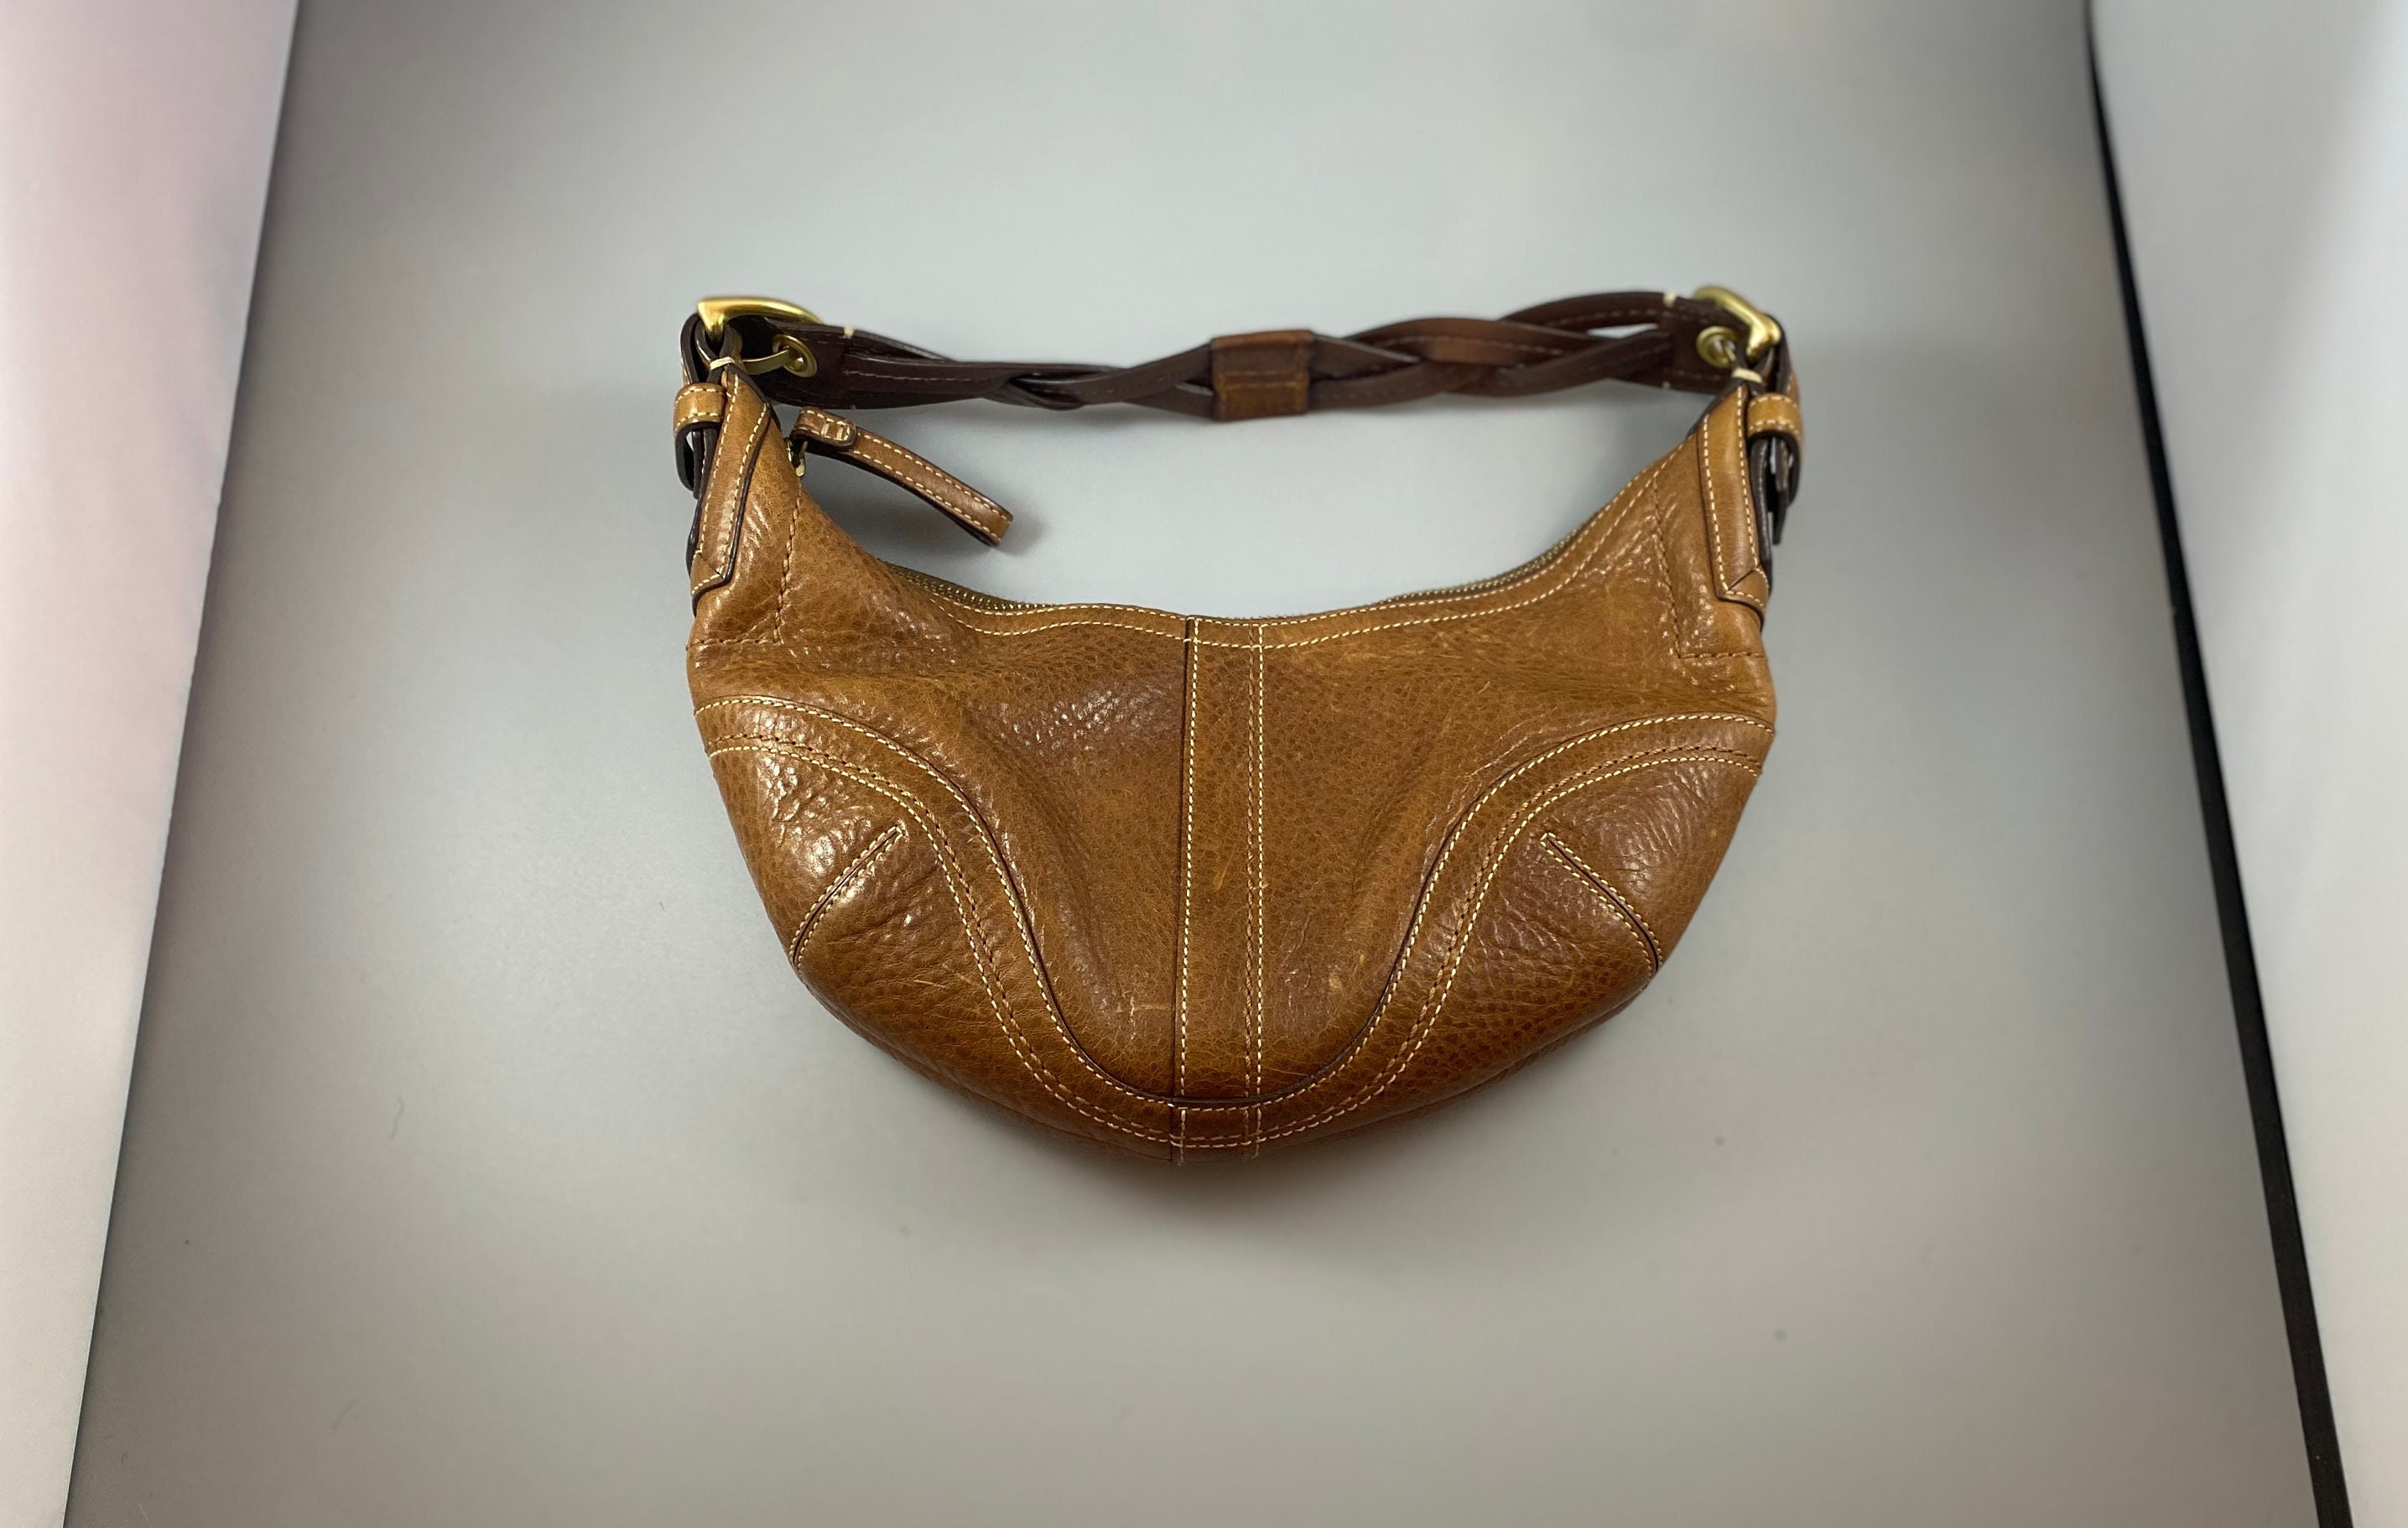 Vintage Coach hobo bag in whisky with braided strap